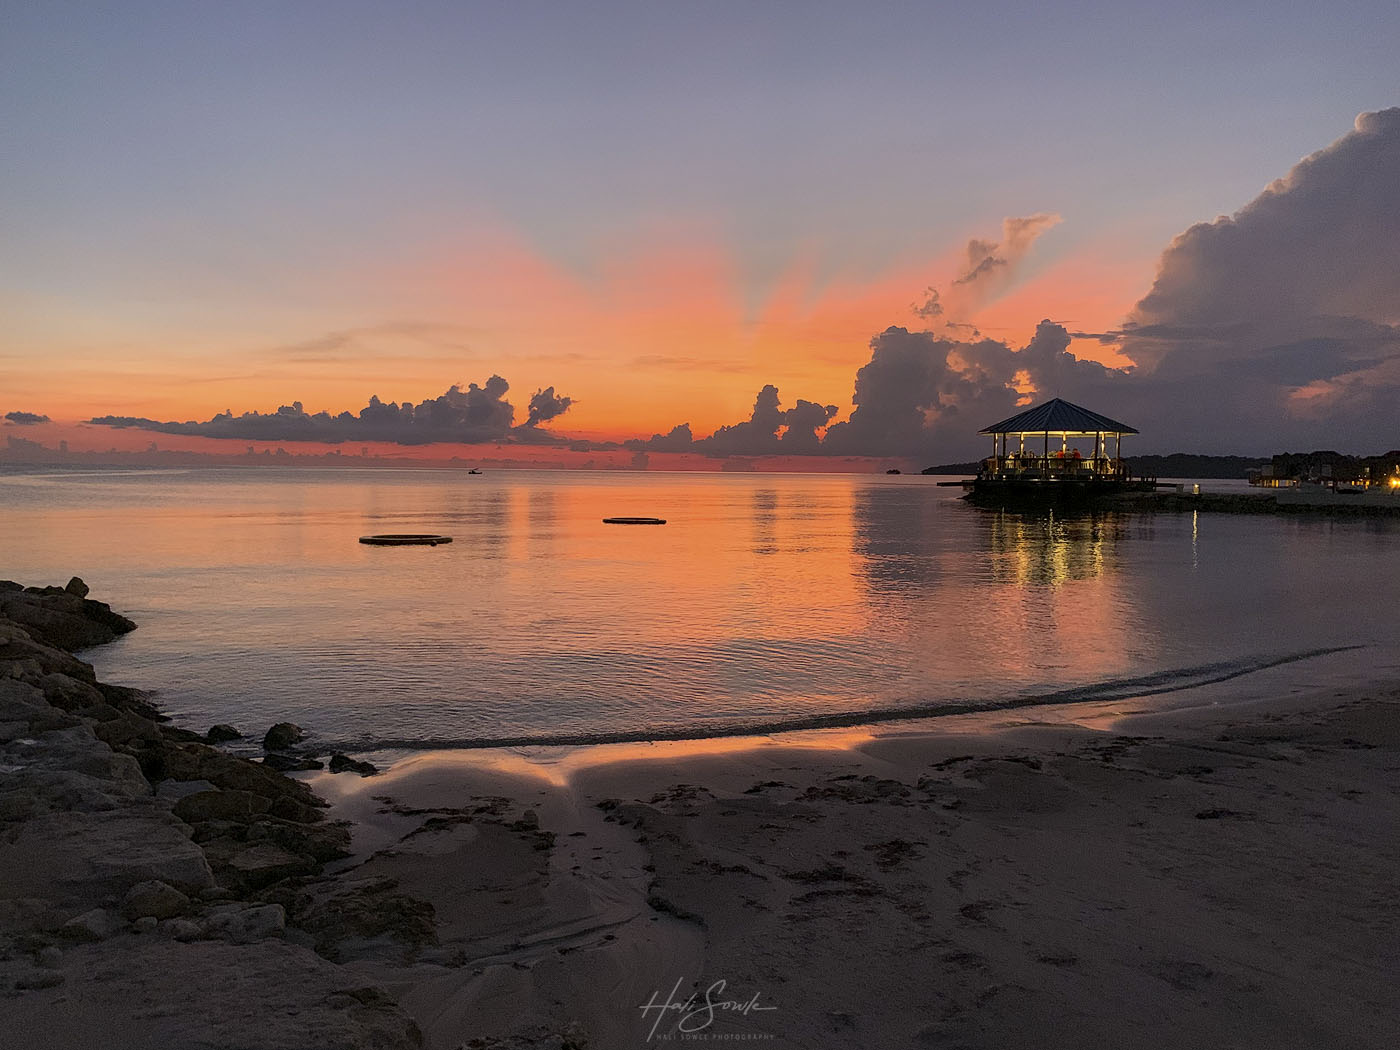 2019_09_Sandals-SouthCoast-10792-Edit1000.jpg - Iphone sunset.  We only took out our SLR's once for sunset, but after we put them back in the room and went down for dinner this was what greated us on the beach.  They say the best phone is the one you have with you and the iPhone came through.